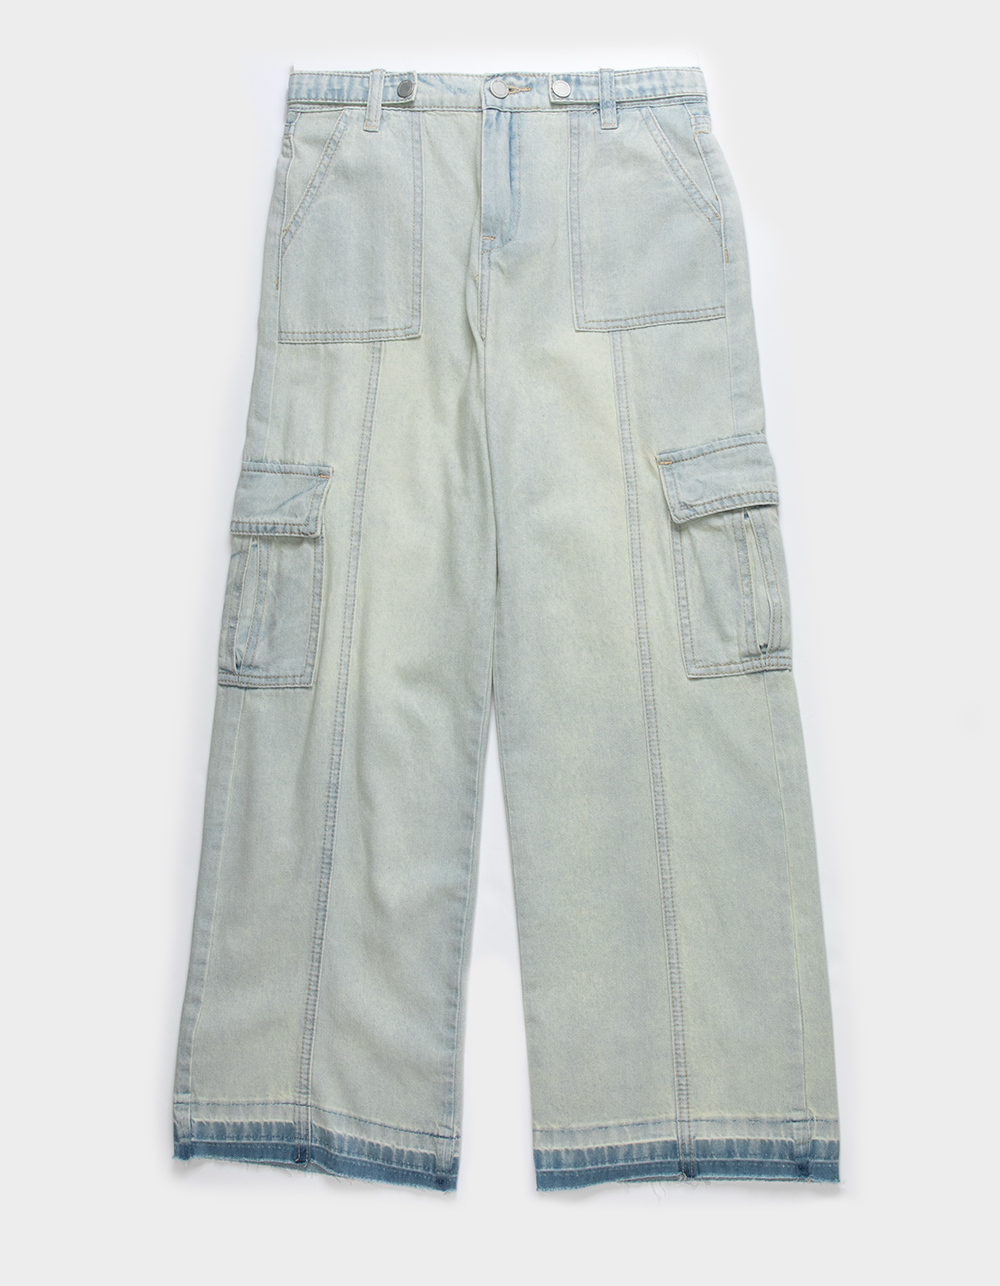 BLANK NYC Call My Name Girls Cargo Pants - LIGHT WASH | Tillys